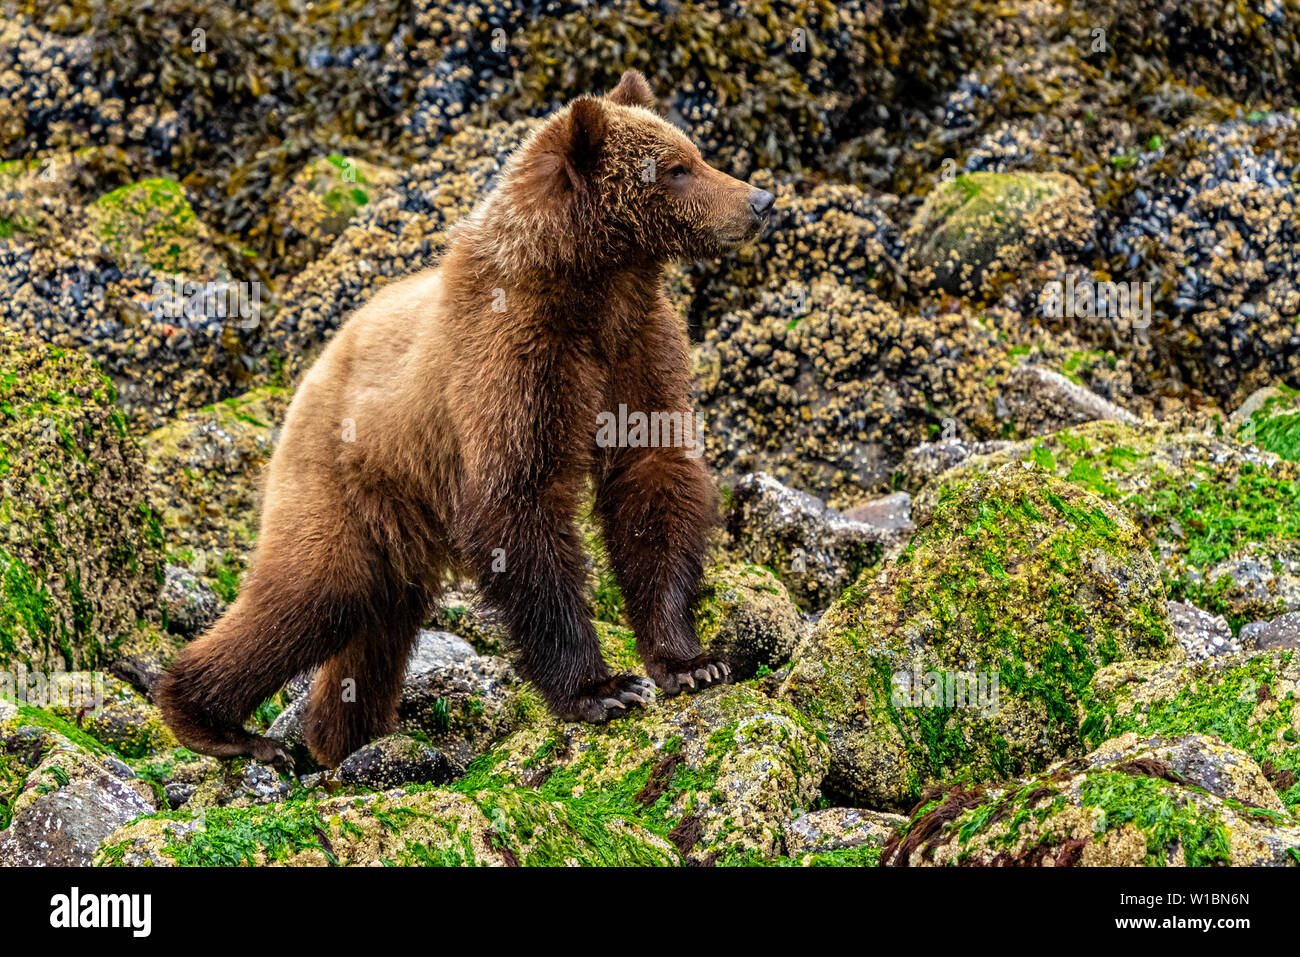 Grizzly bear cub feasting along the low tideline in Knight Inlet, First Nations Territory, British Columbia, Canada. Stock Photo